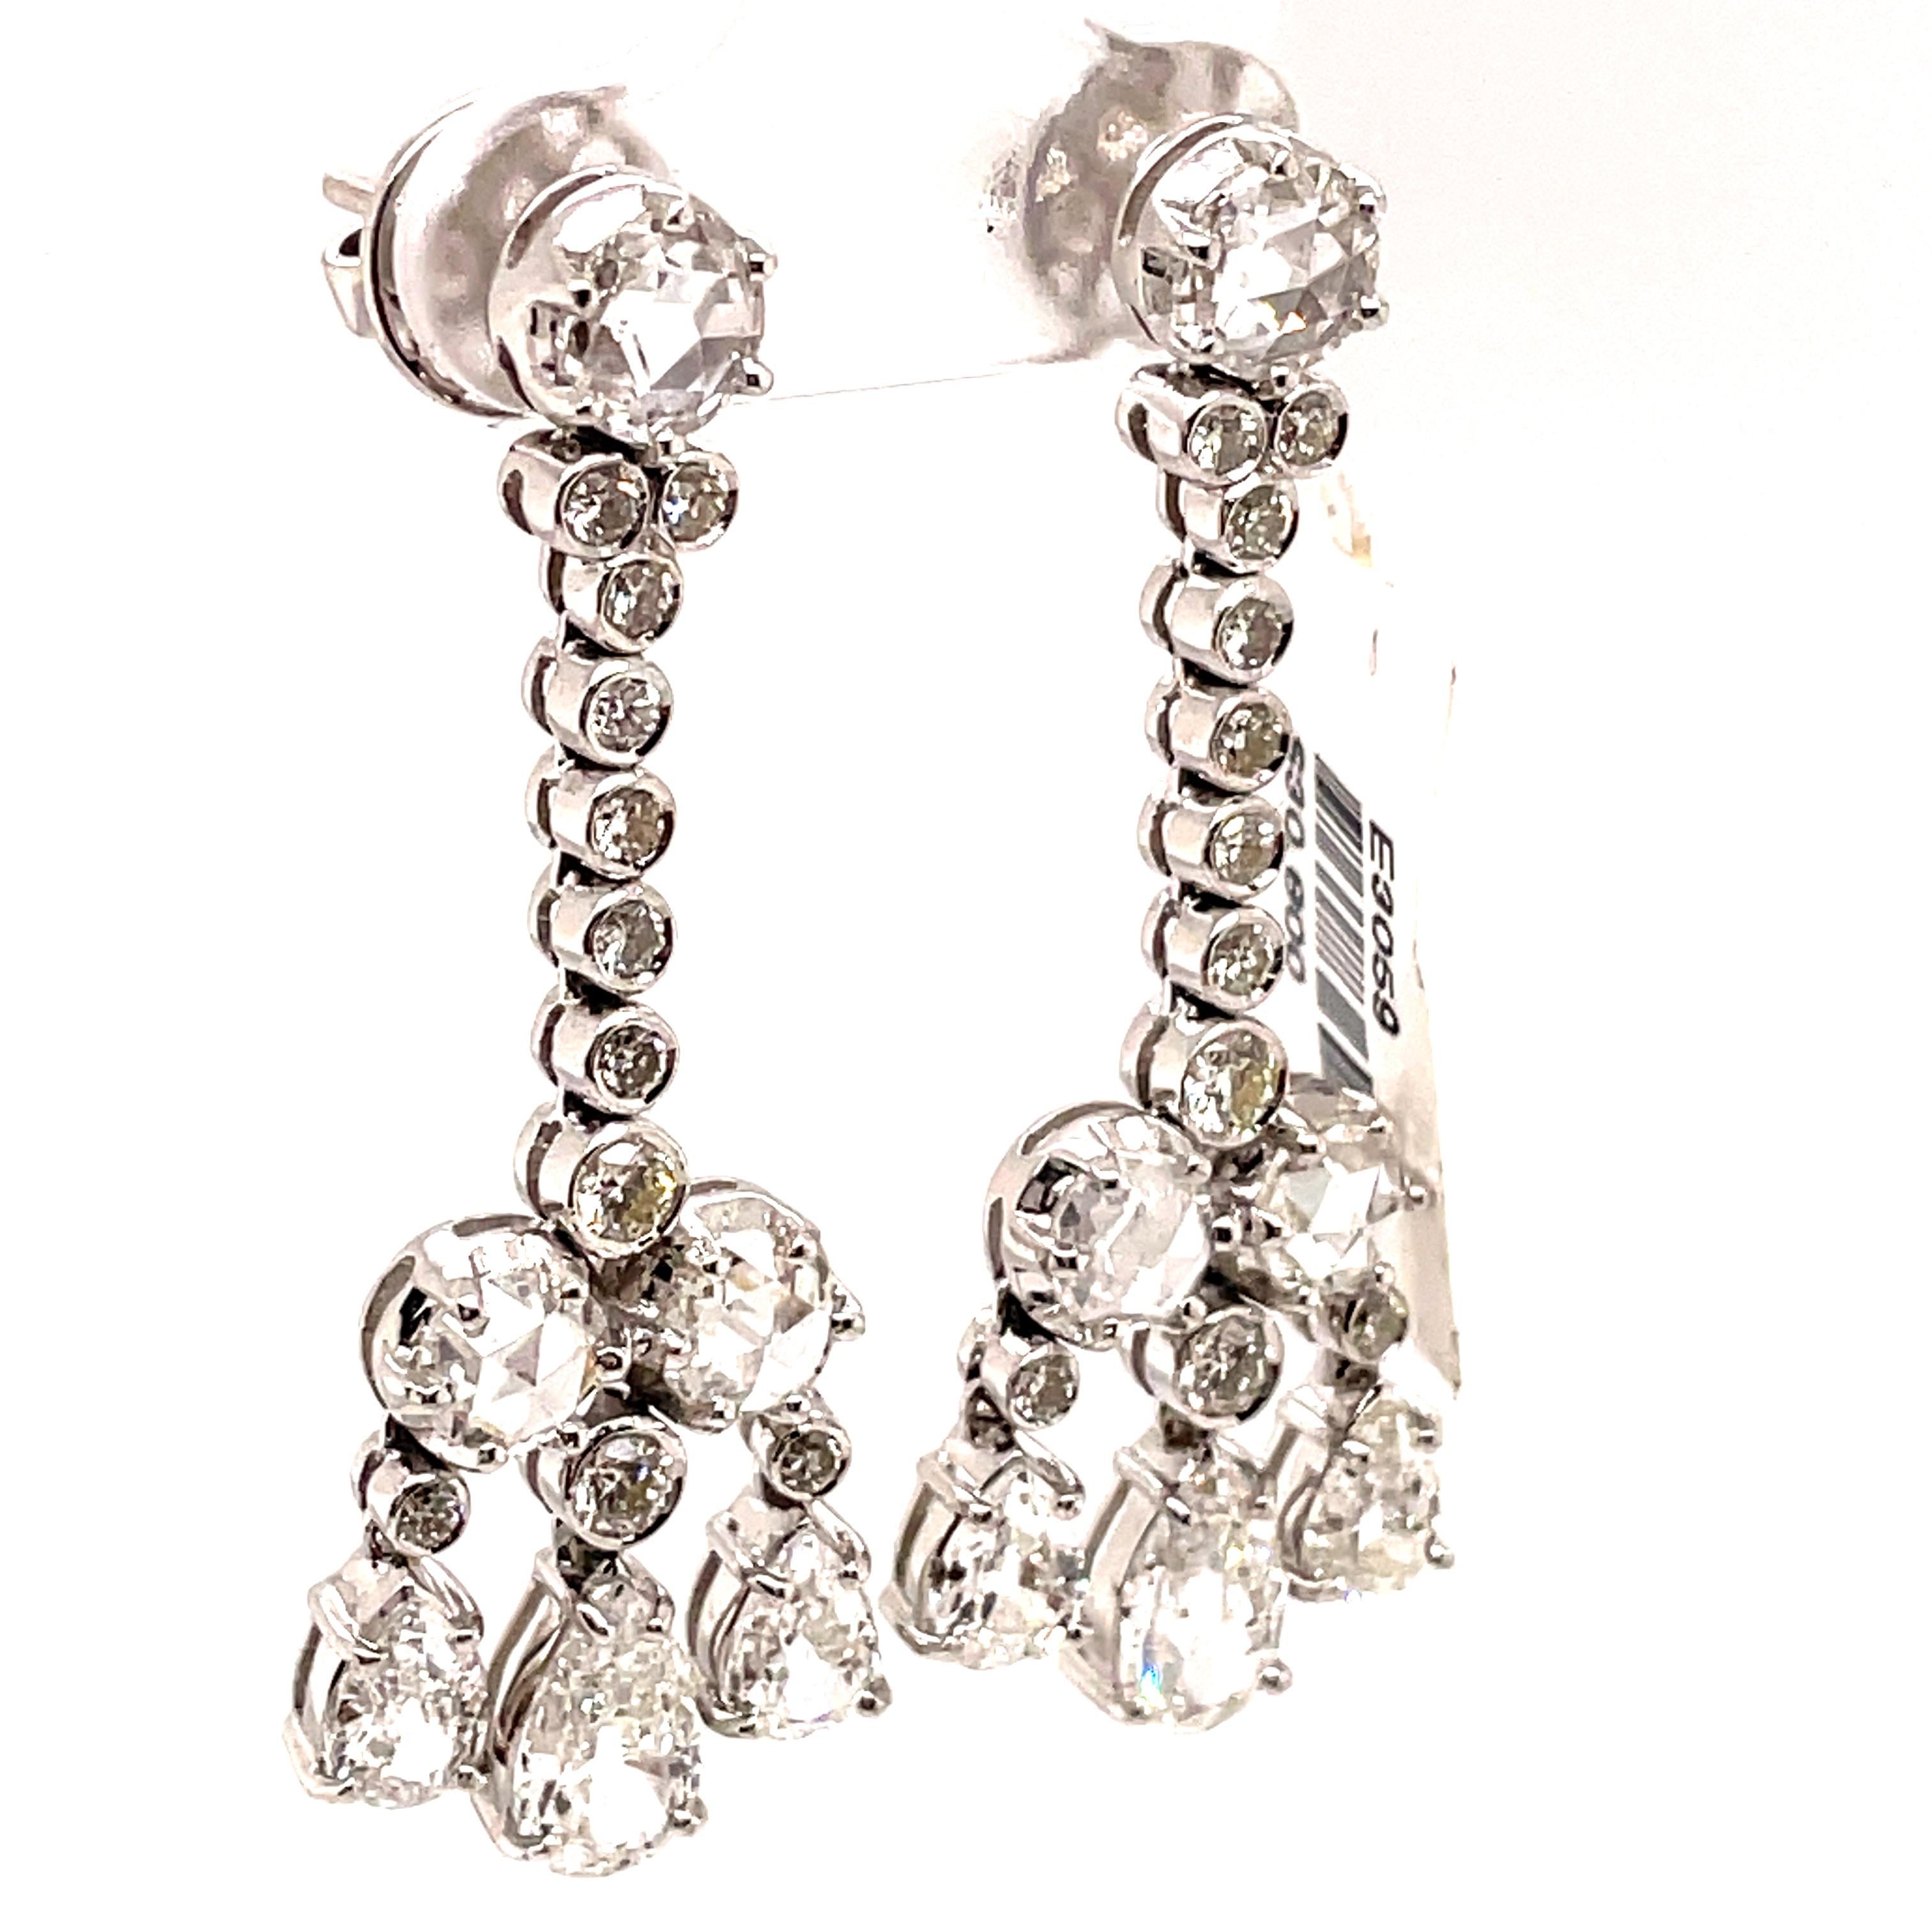 Contemporary 6.82ct Pear, Rose Cut, & Round Diamond Chandelier Earrings 18k White Gold For Sale